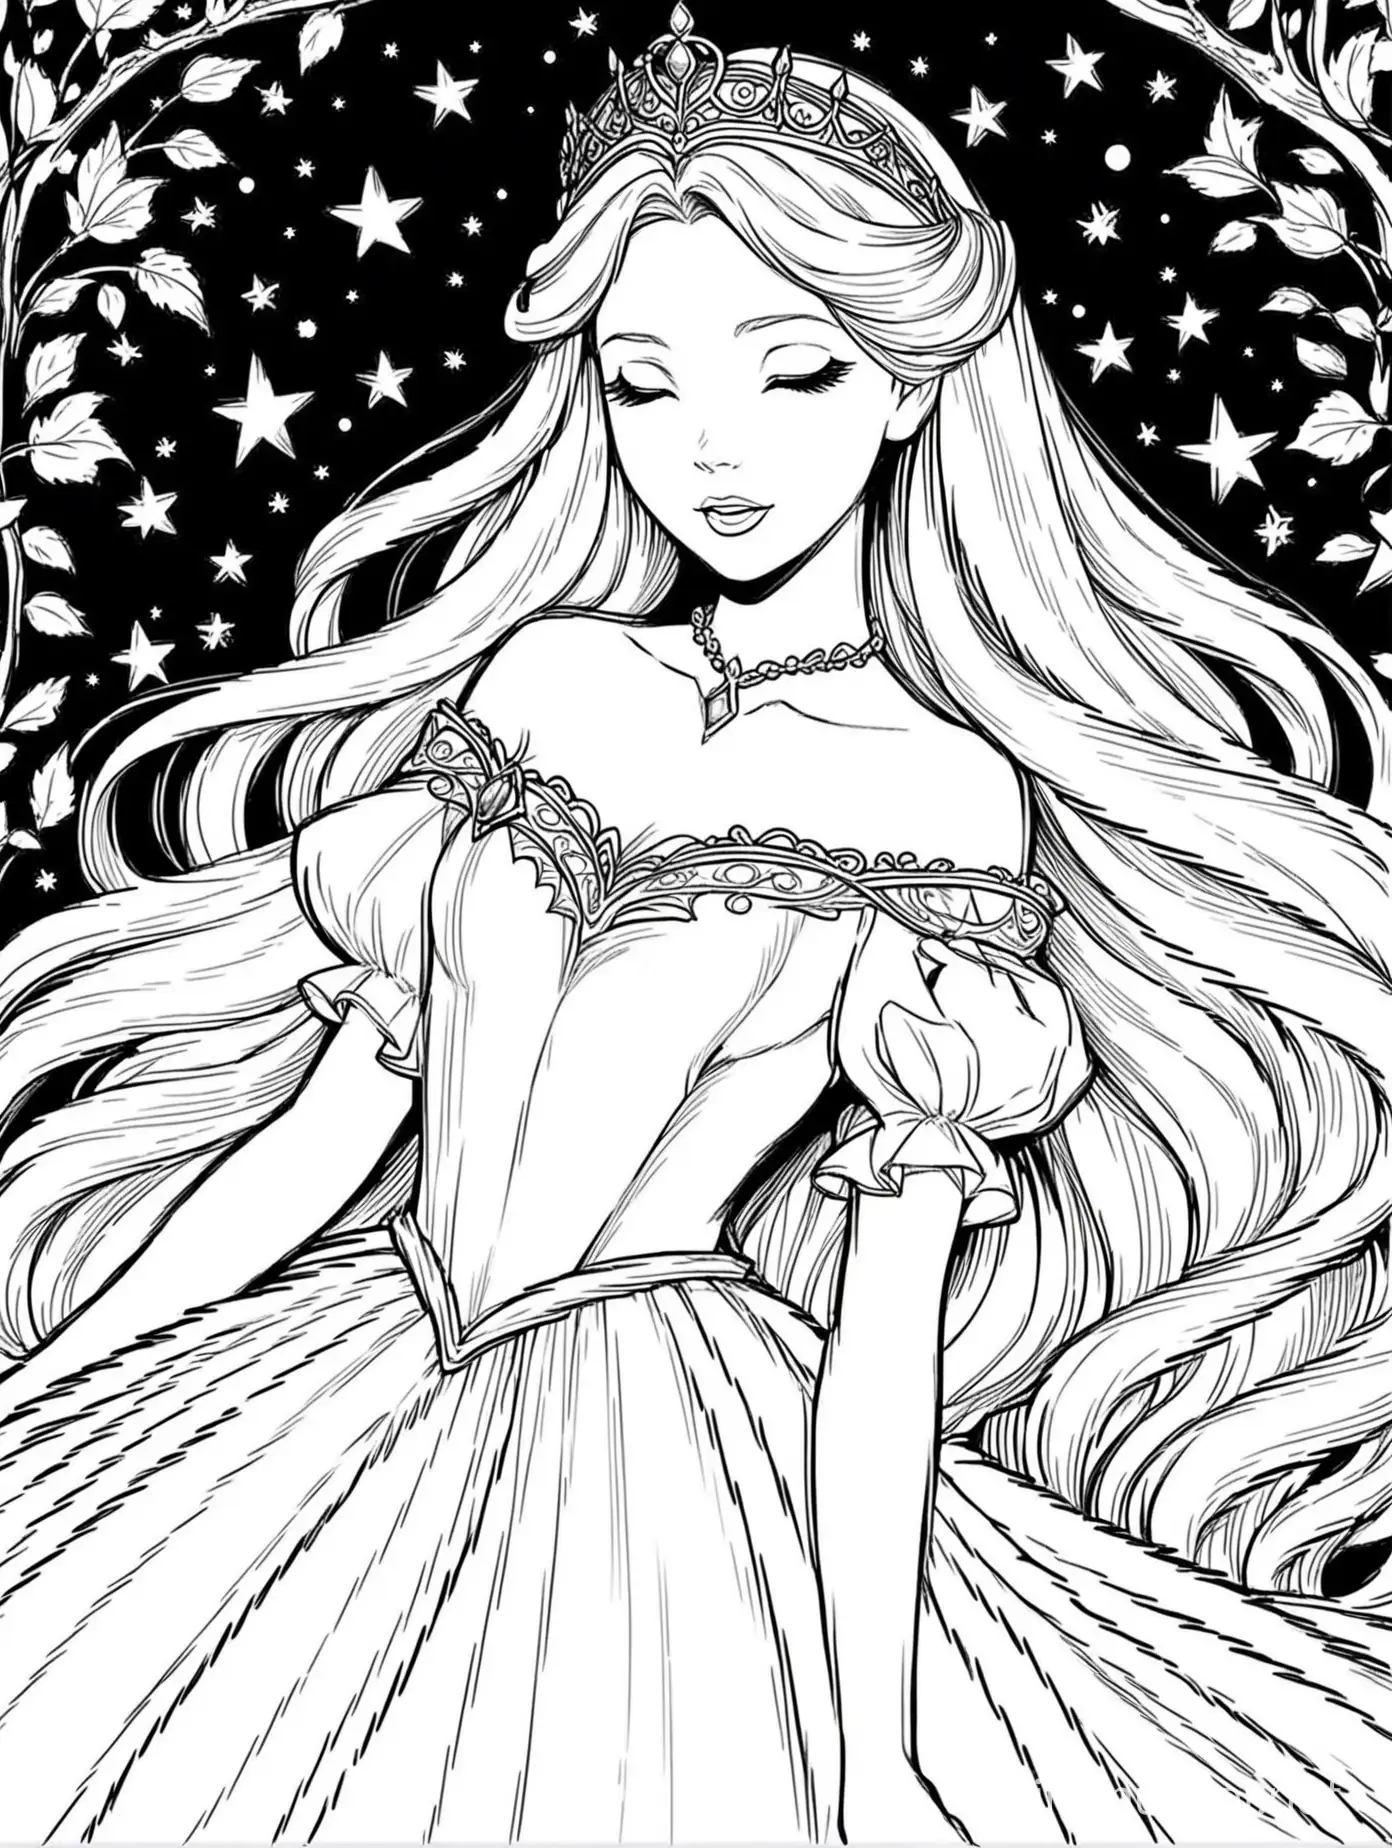 Disney Princess Aurora Coloring Page Black and White Illustration of Sleeping Beauty